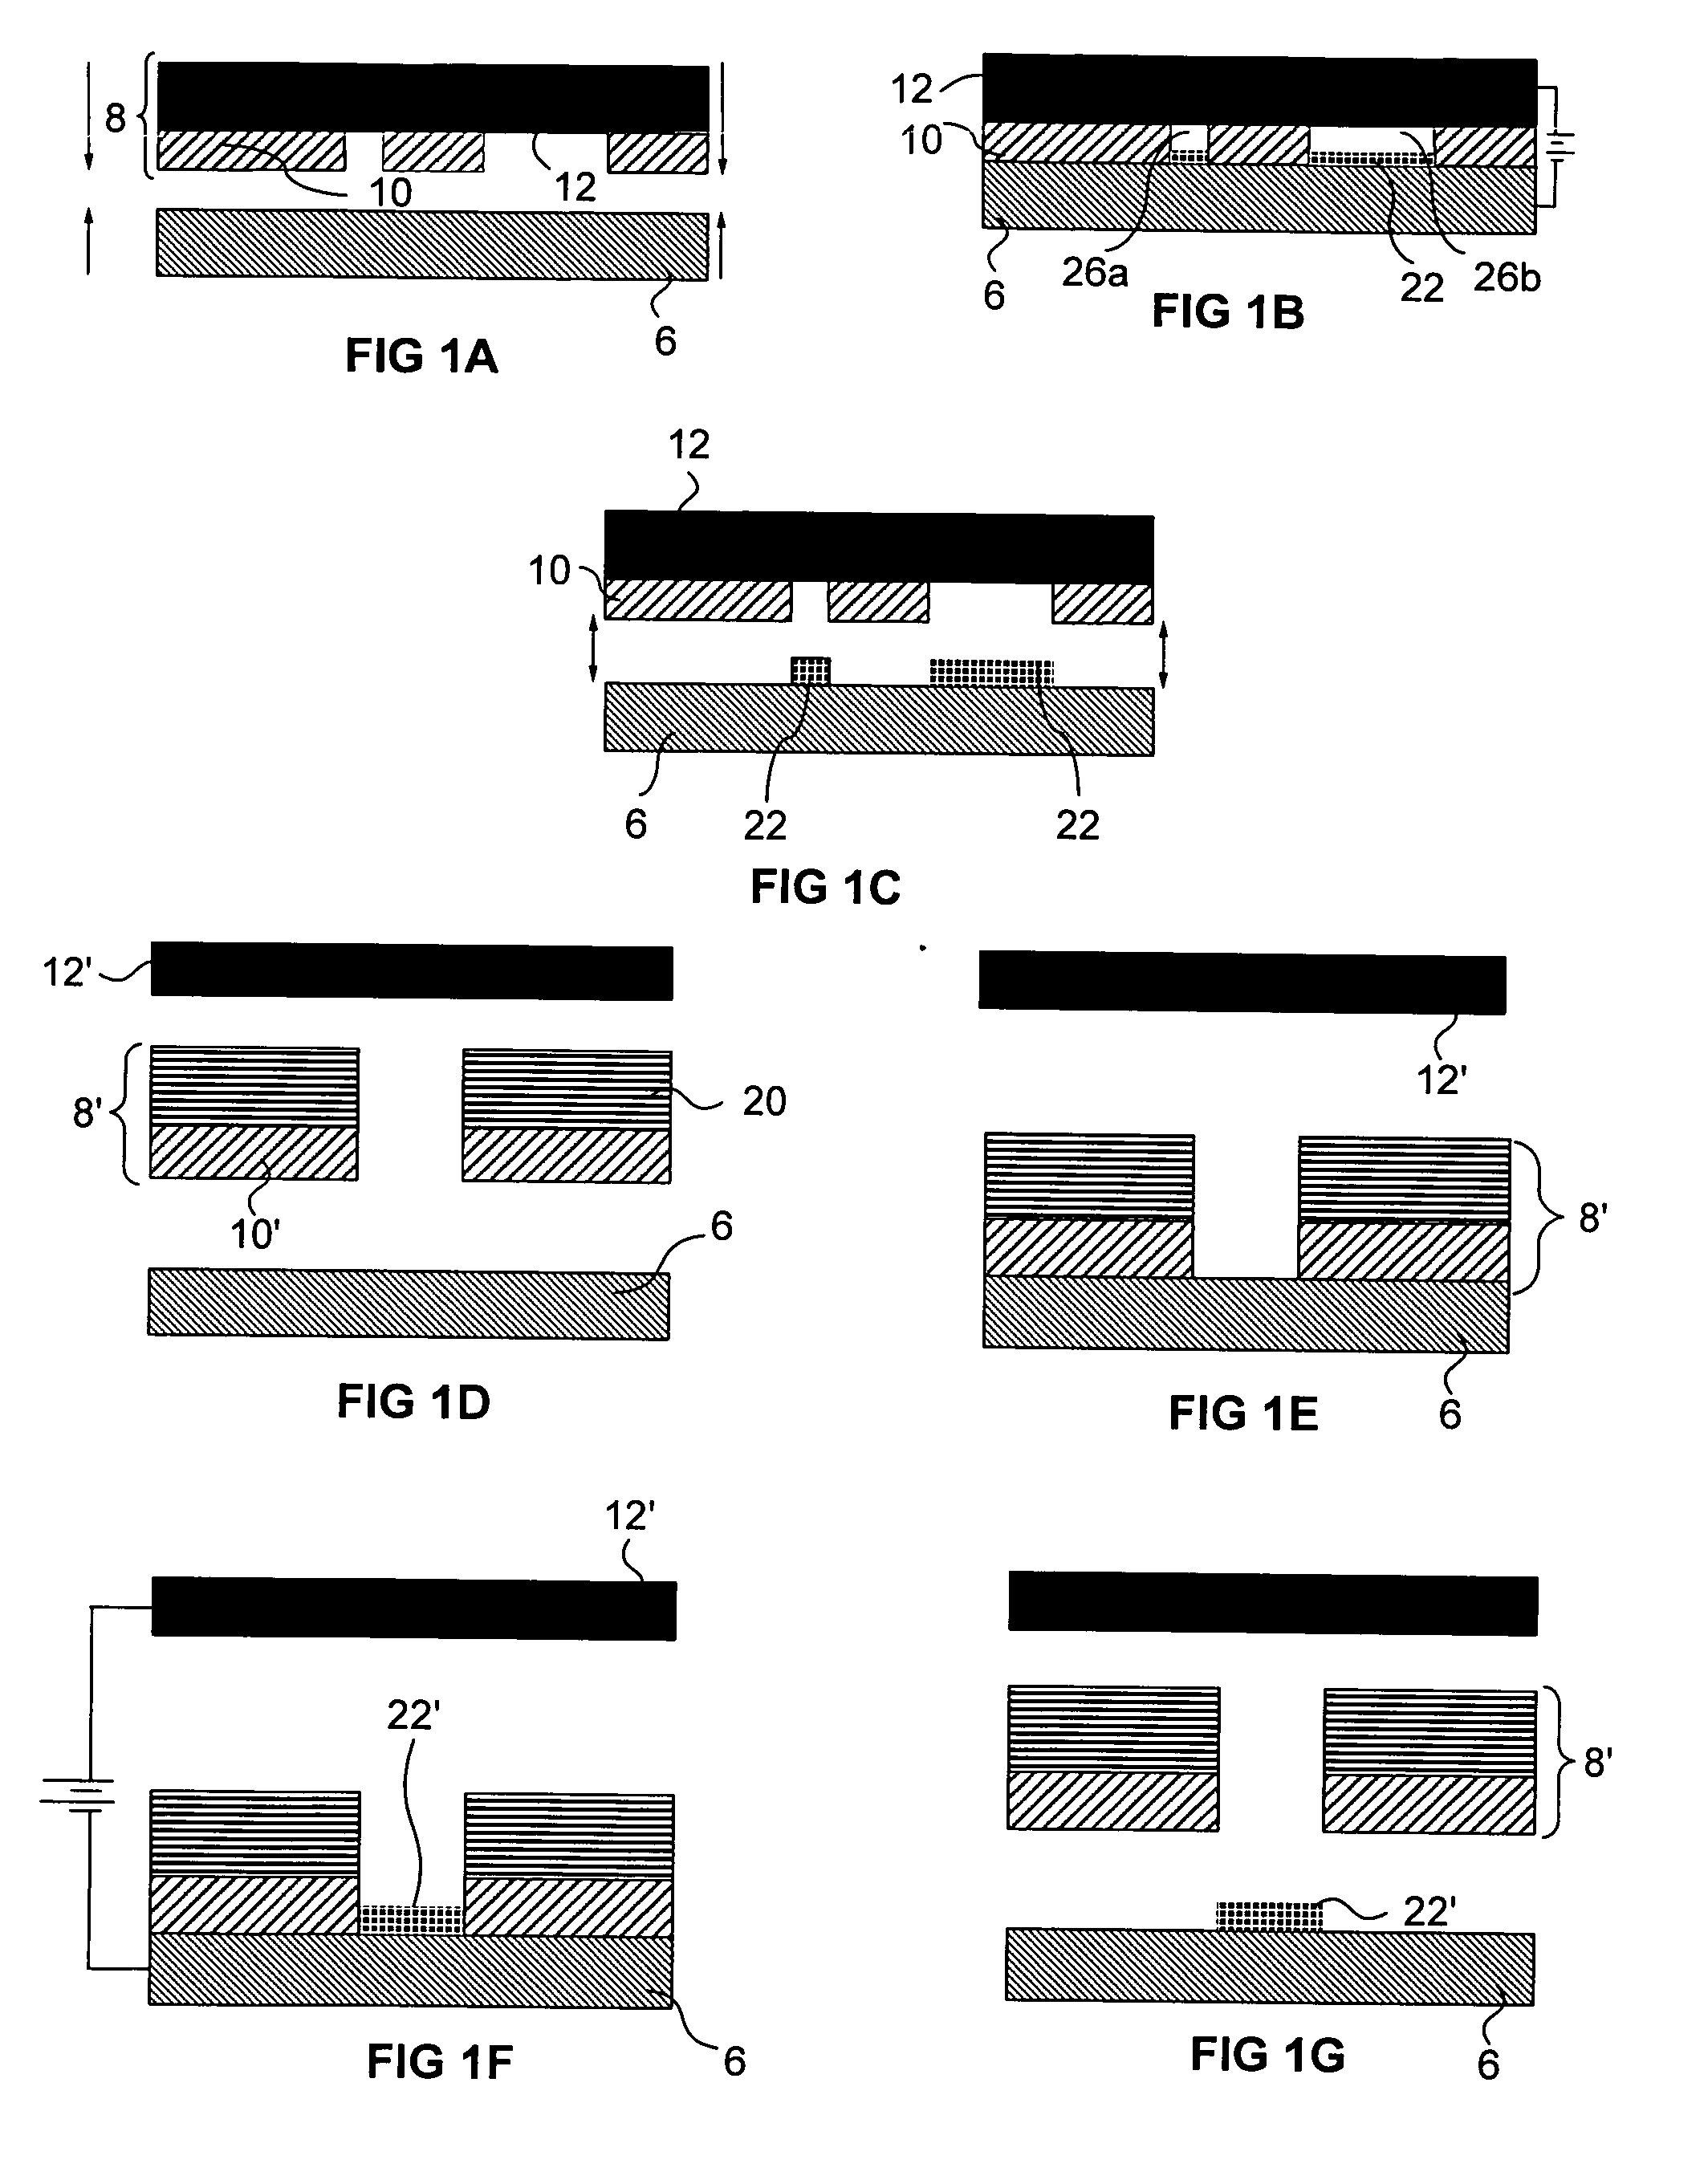 Electrochemical fabrication method for fabricating space transformers or co-fabricating probes and space transformers